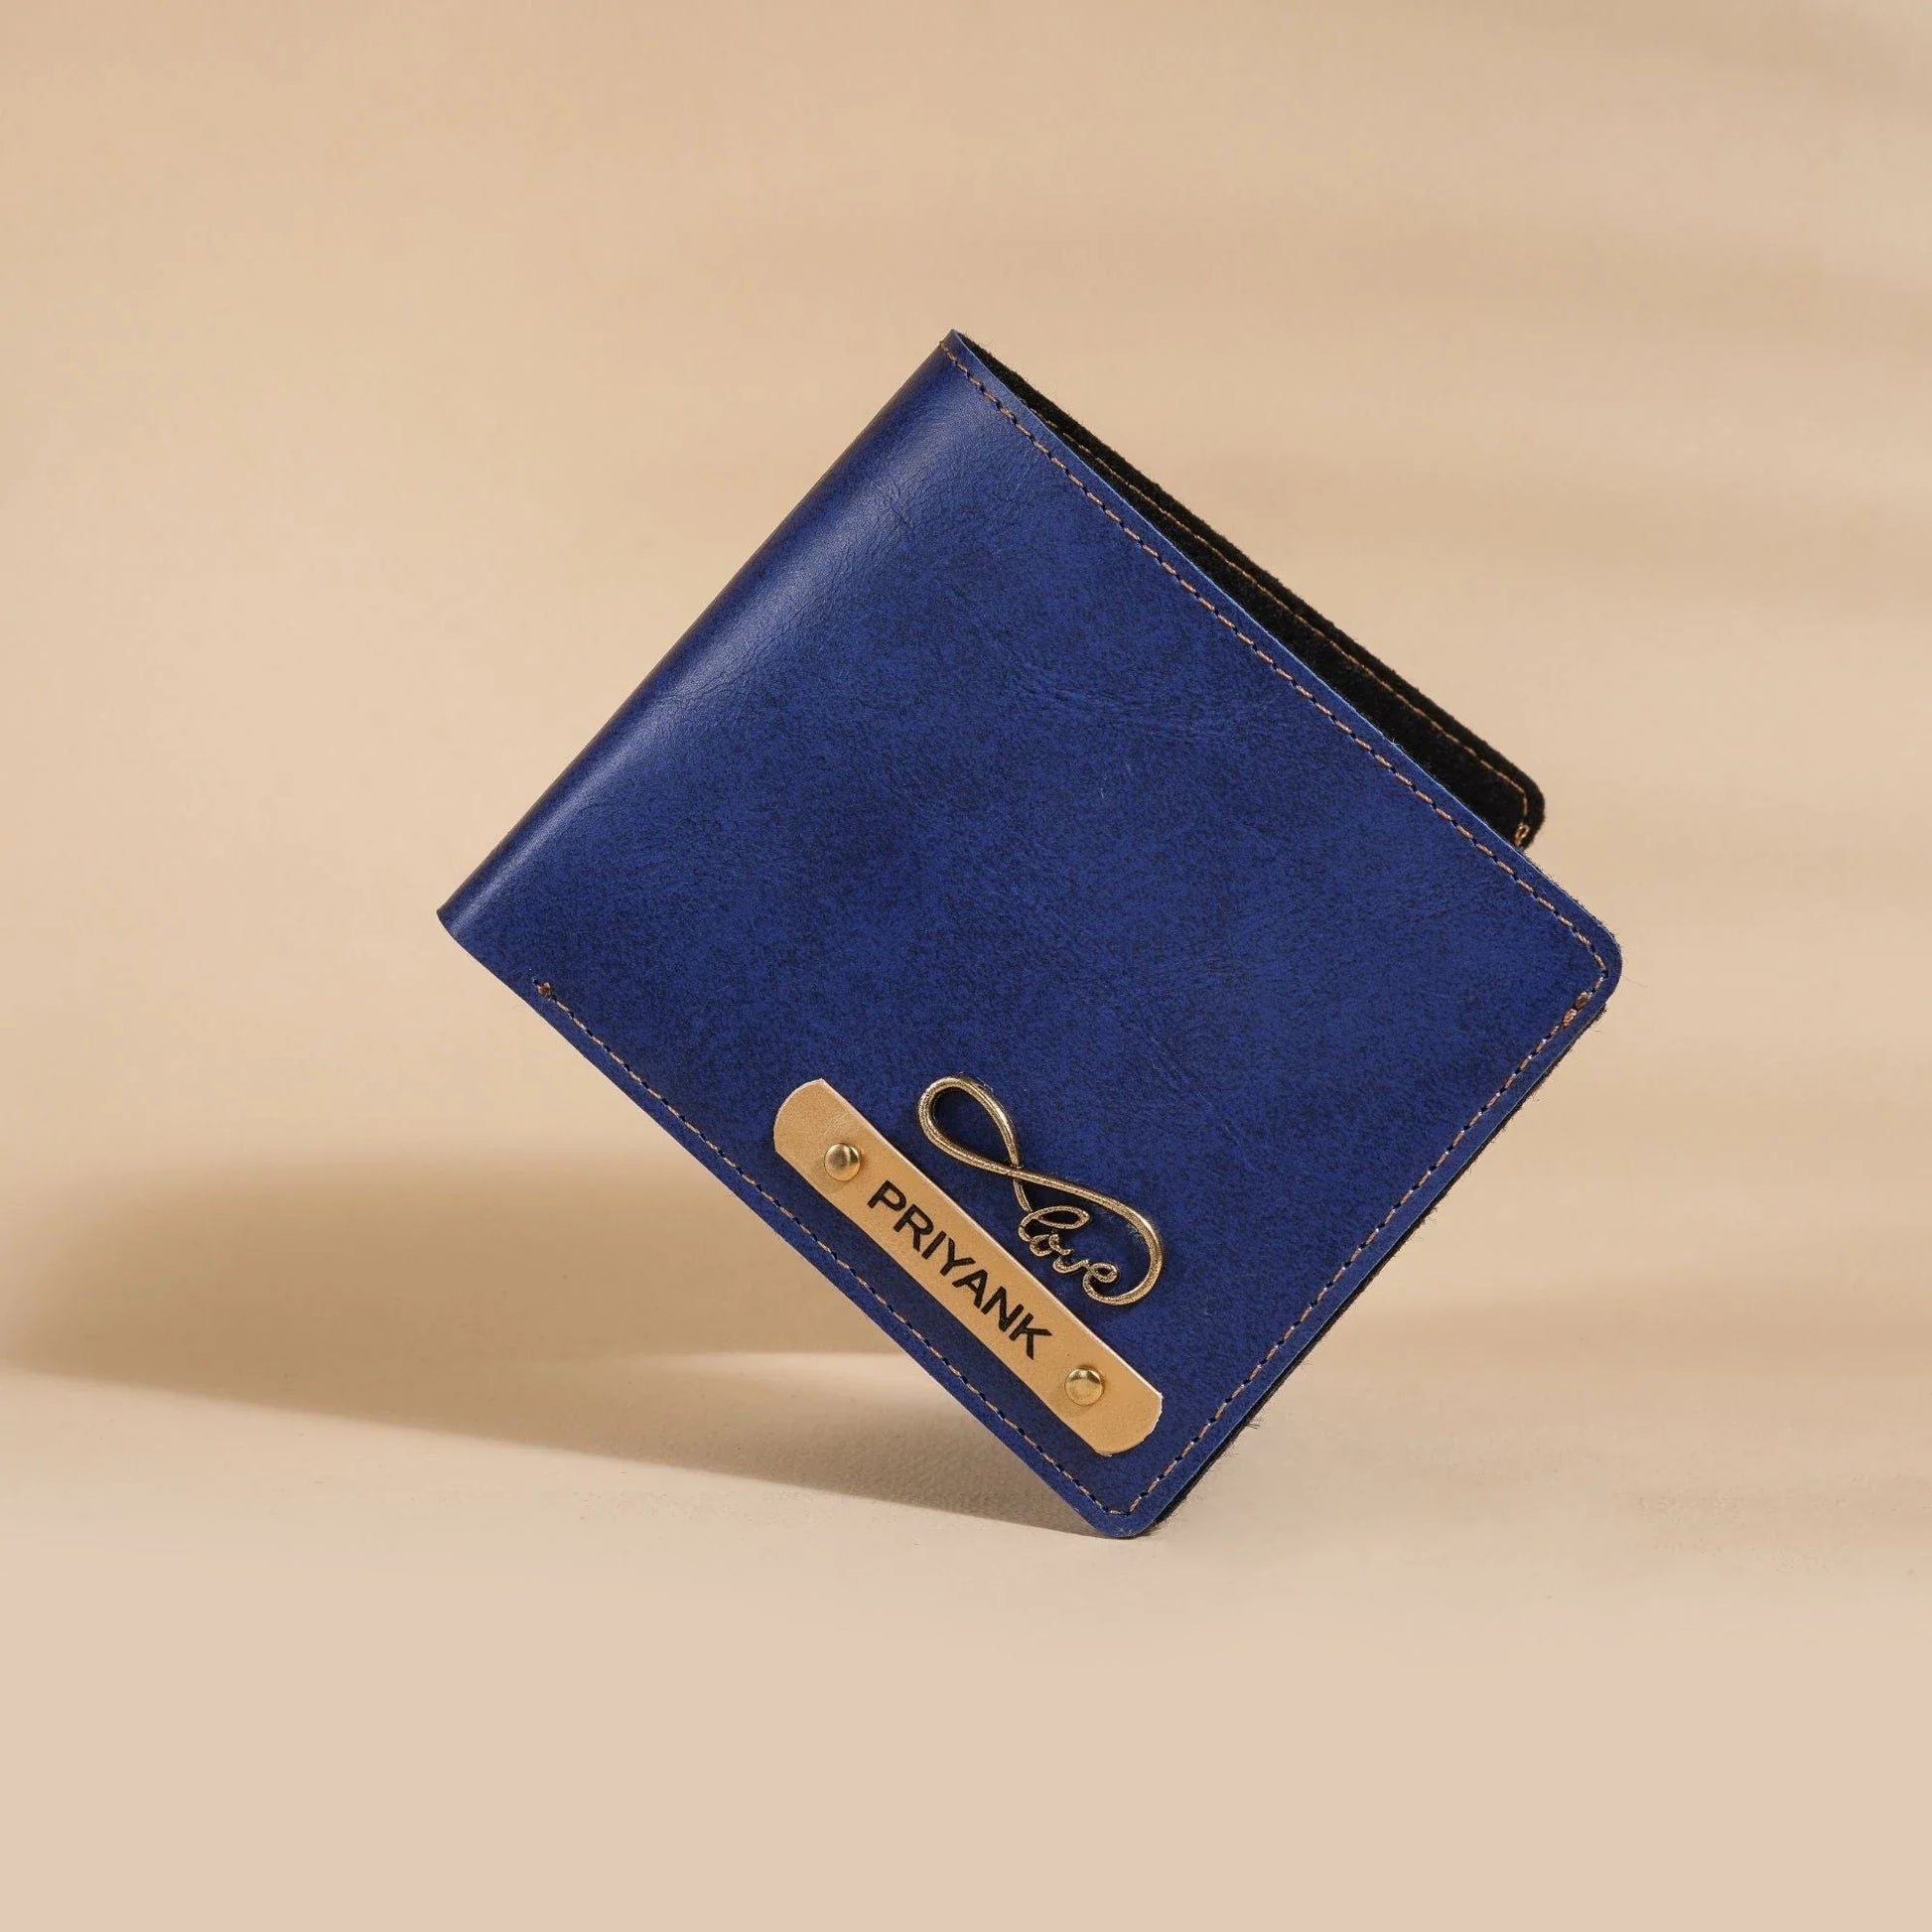 Good art is in the wallet of the beholder. So why should your wallet not look artistic and classy? With our Personalized Leather Wallets for Women and Girls, organising your things can become smooth and stylish at the same time!